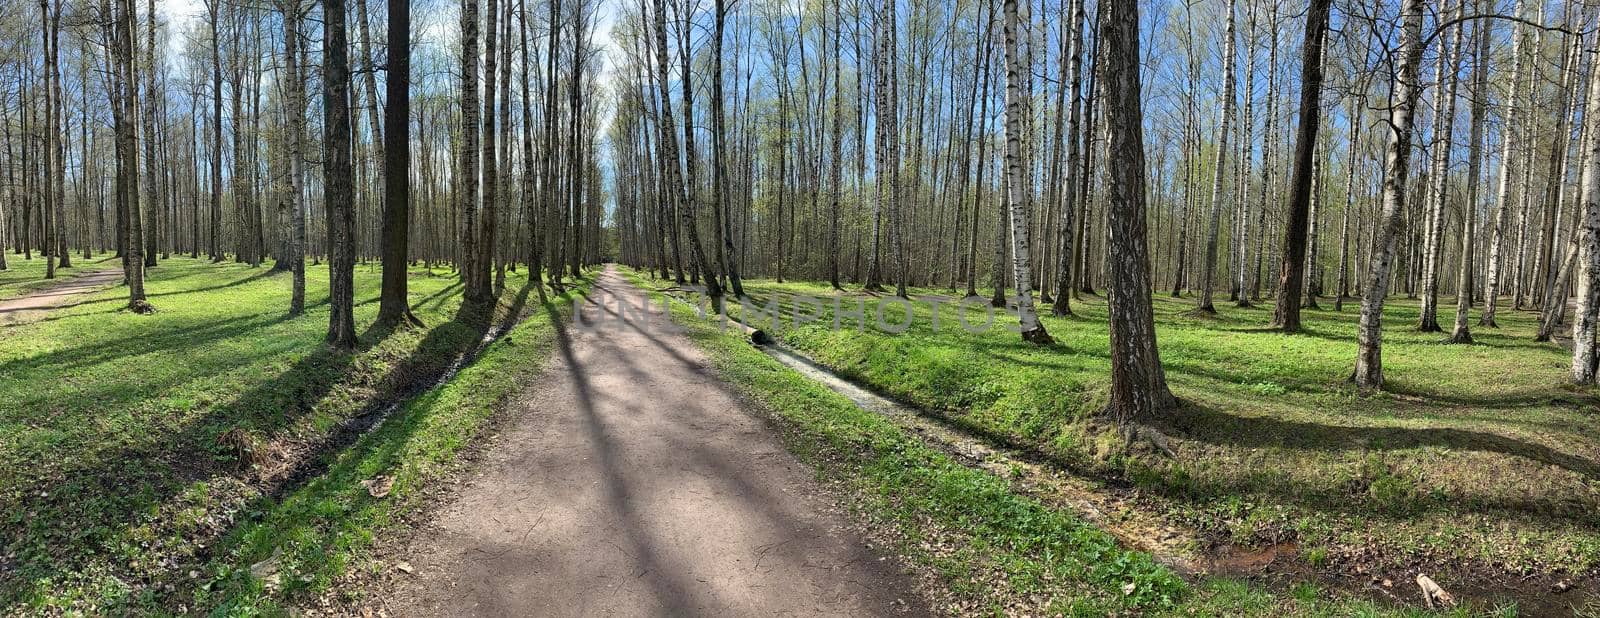 Panorama of first days of spring in a forest, long shadows, blue sky, Buds of trees, Trunks of birches, sunny day, path in the woods by vladimirdrozdin